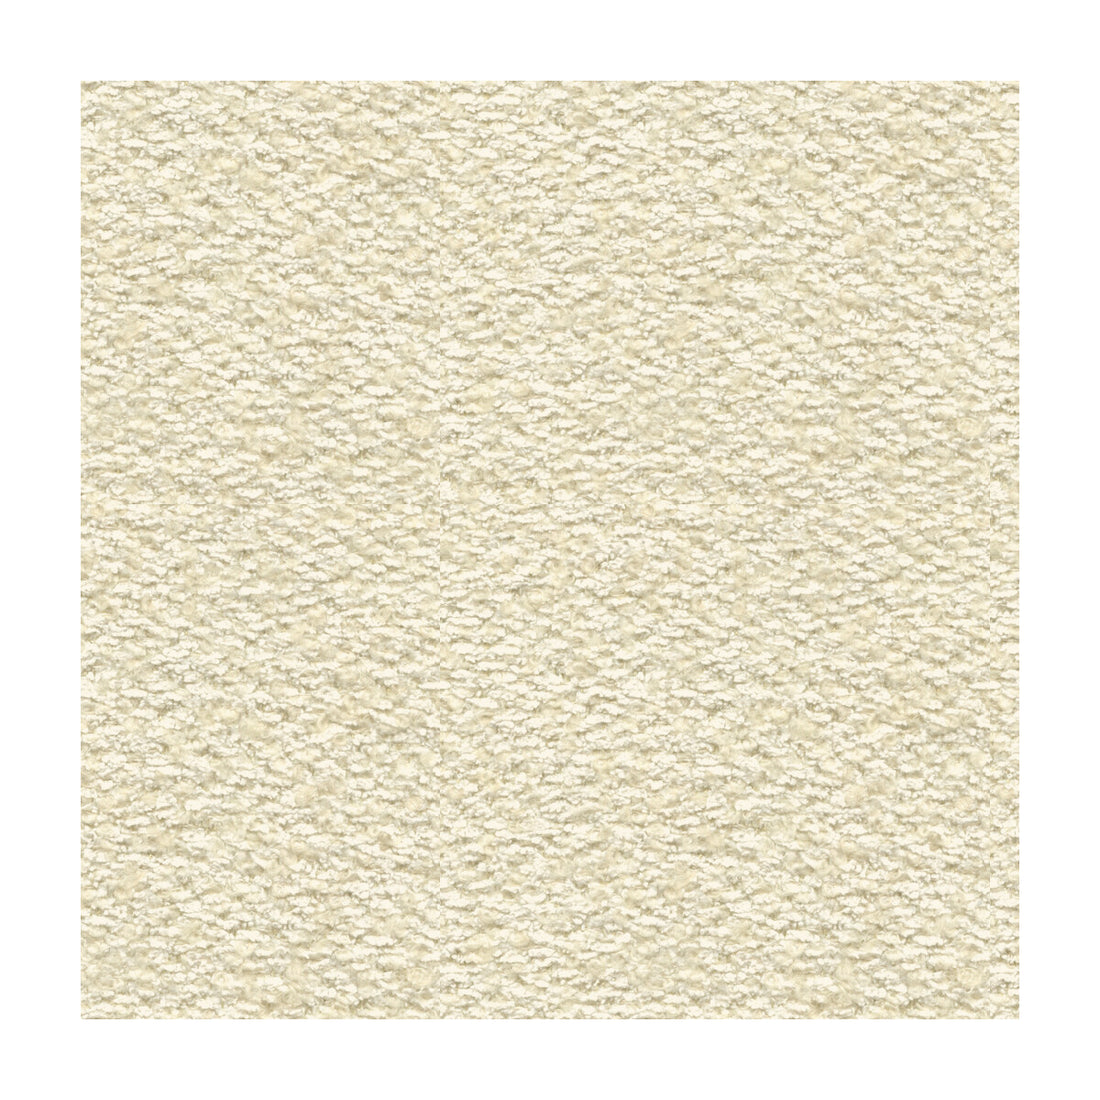 Weaving A Spell fabric in blanc color - pattern 33552.1.0 - by Kravet Couture in the Modern Luxe collection